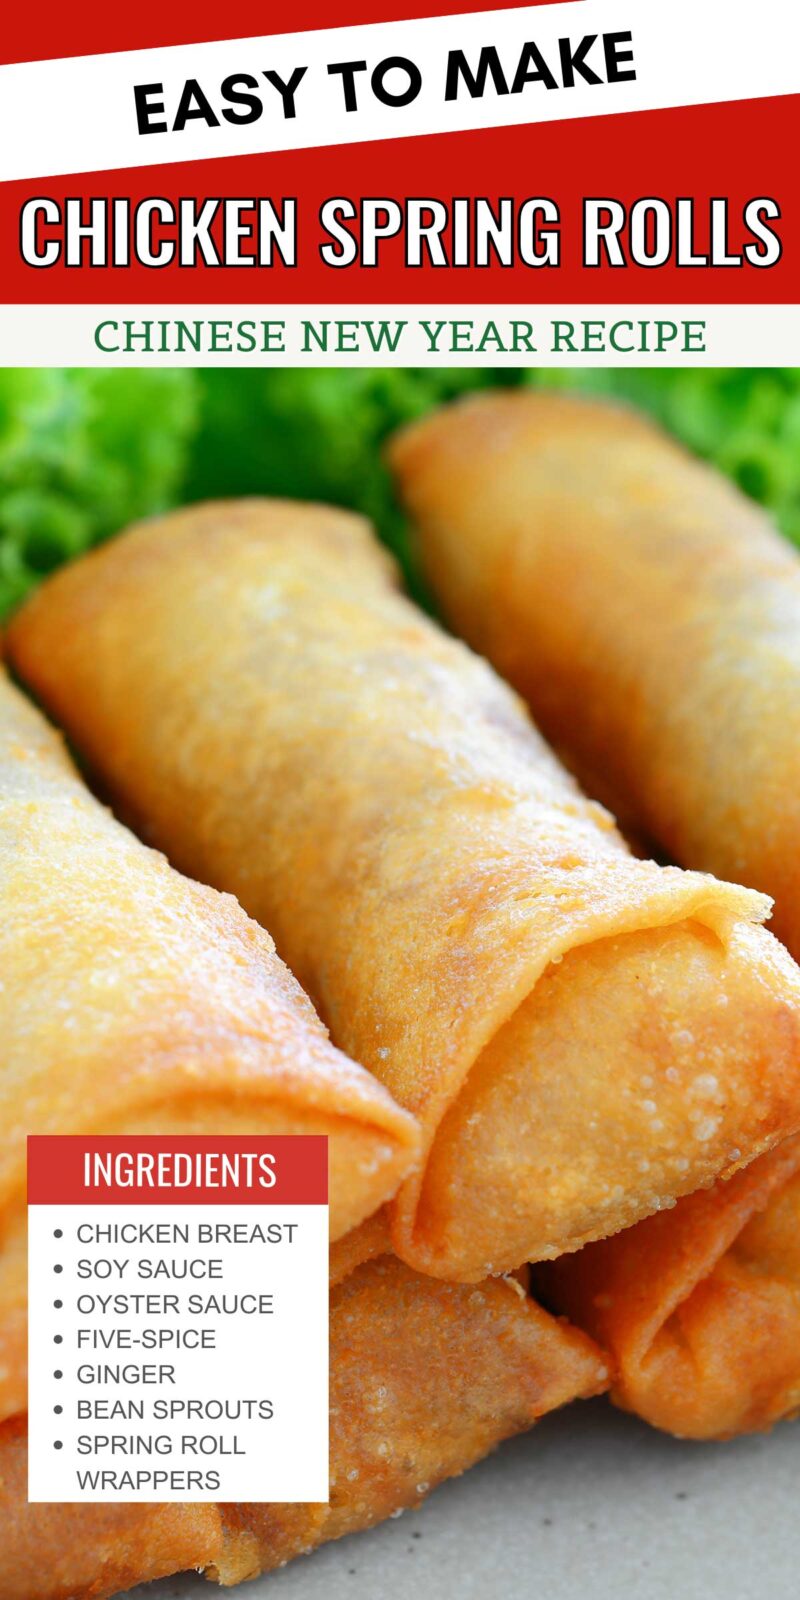 A plate of spring rolls with a list of ingredients. Text overlay says"Easy to make Chicken Spring Rolls - Chinese New Year Recipe